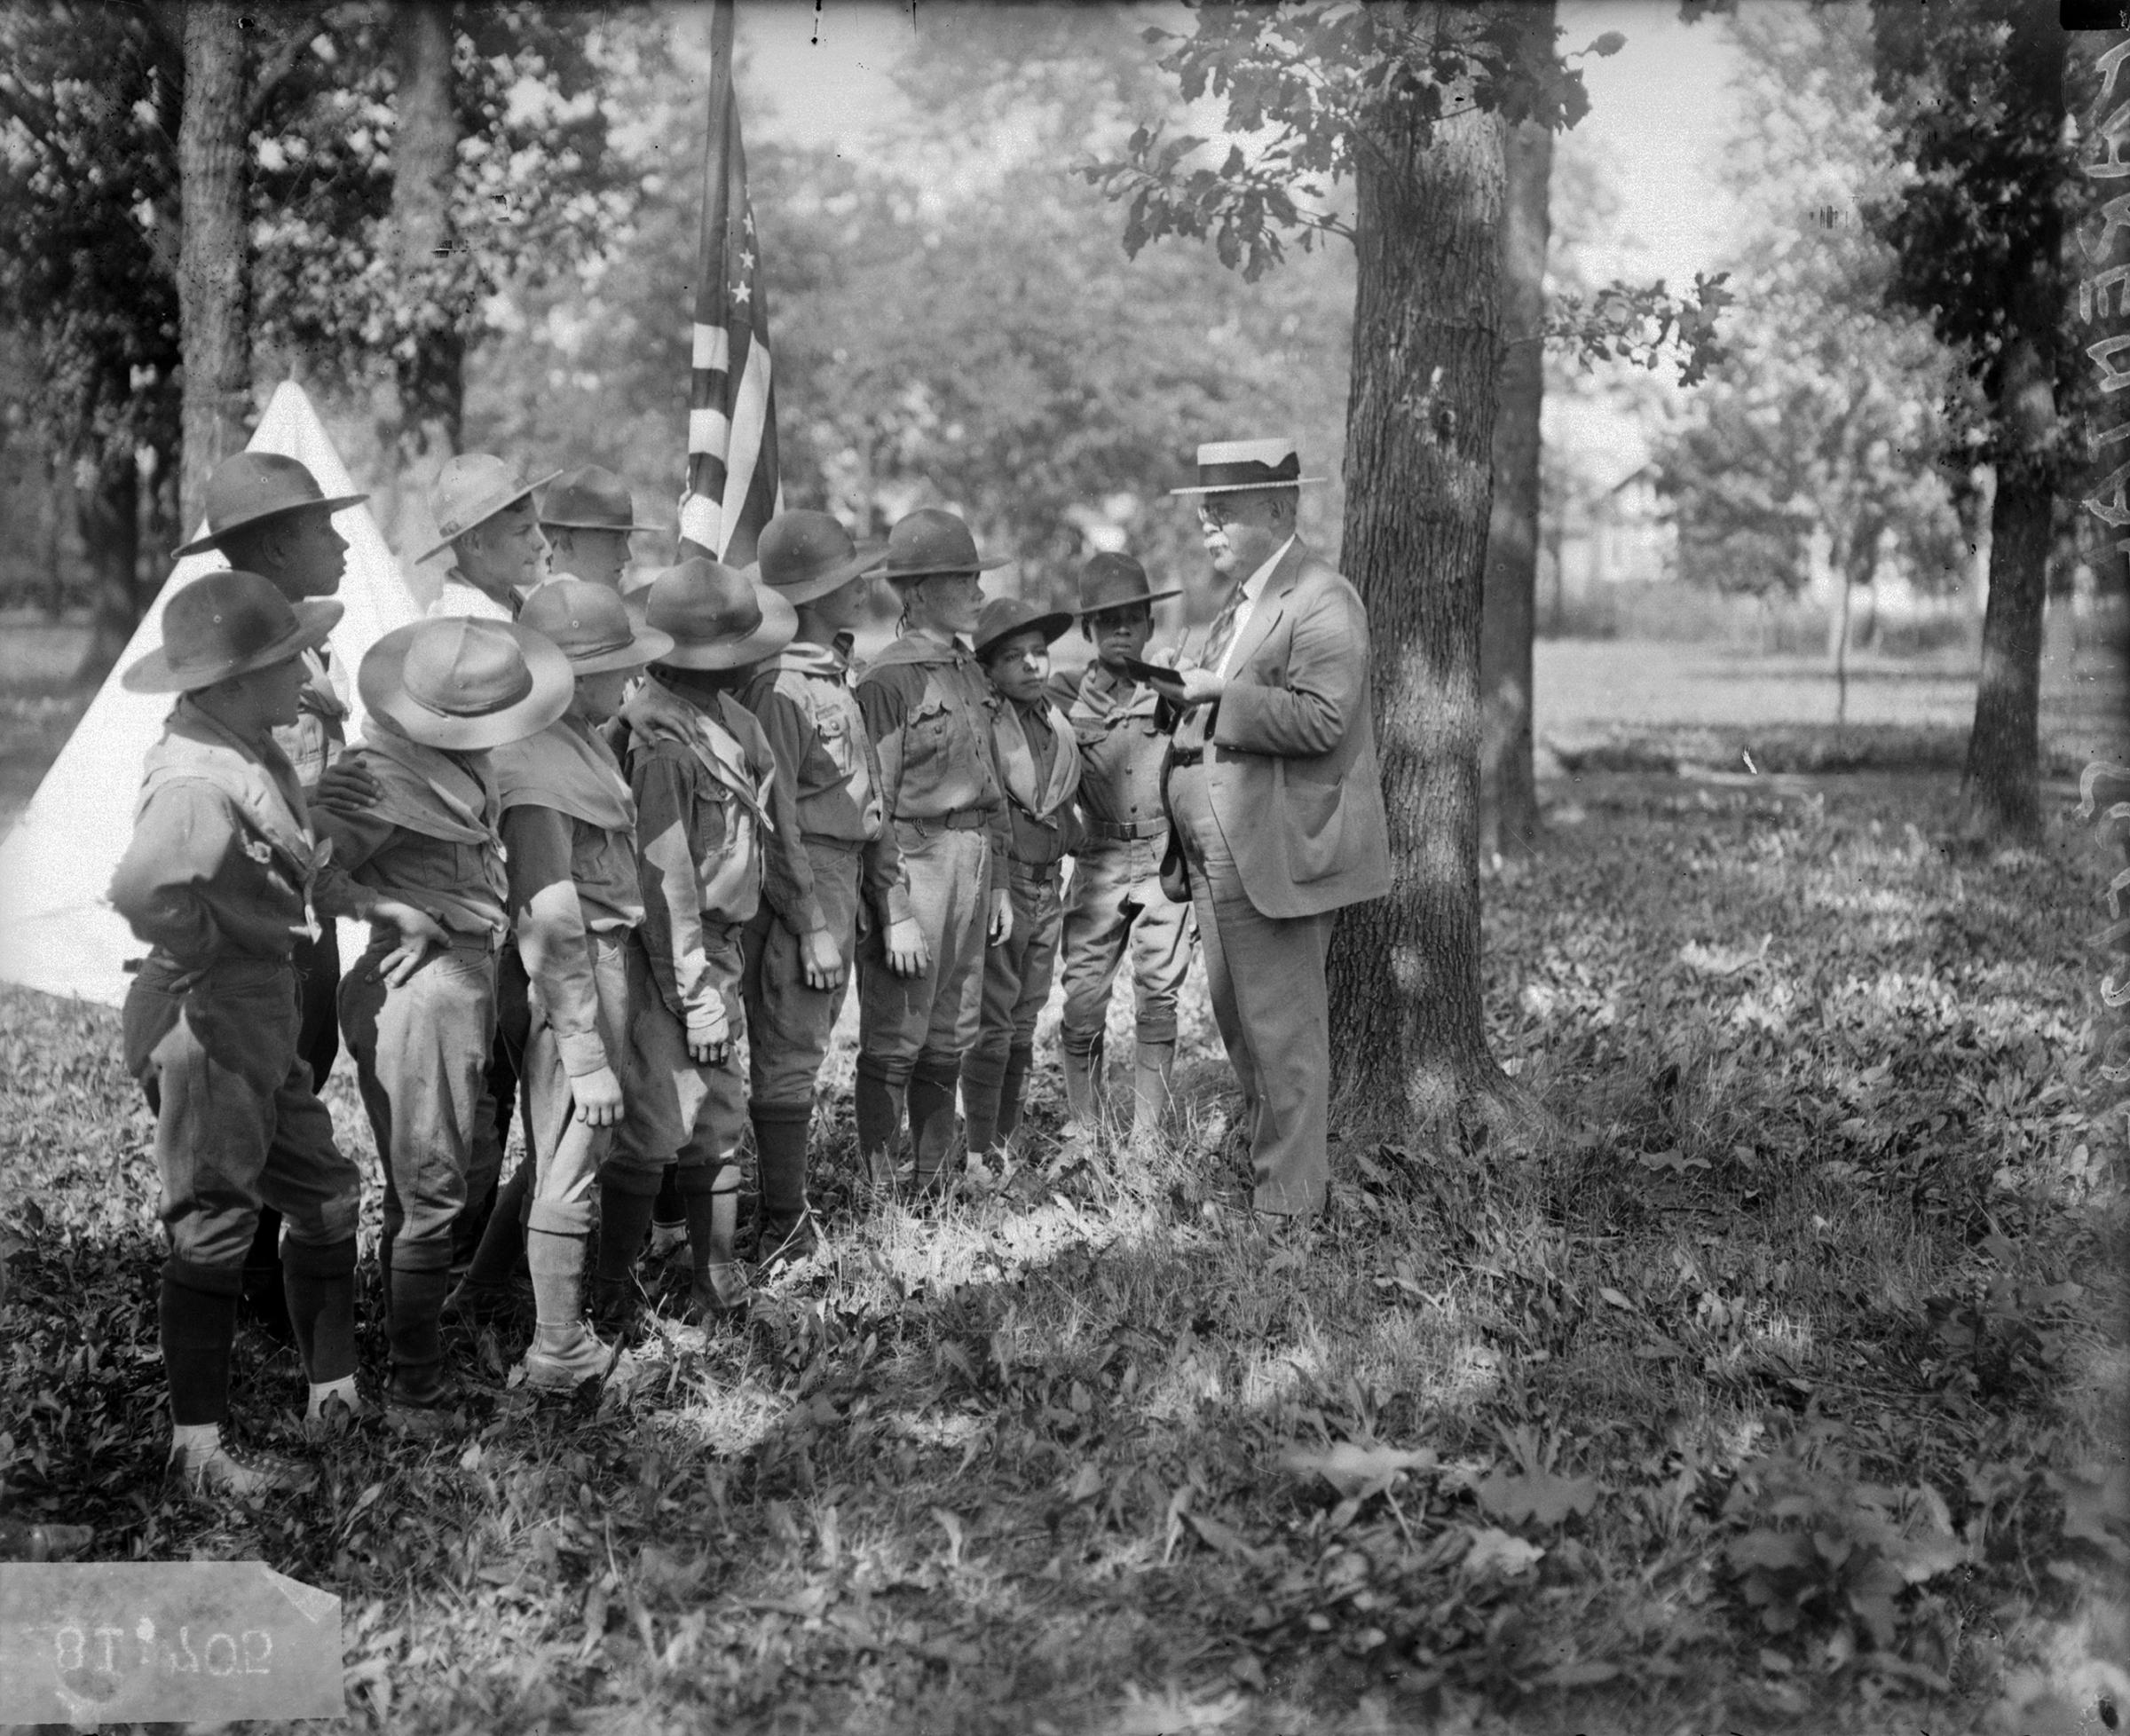 Boy Scouts at the Parental School for Boys in Chicago, Illinois, 1926.